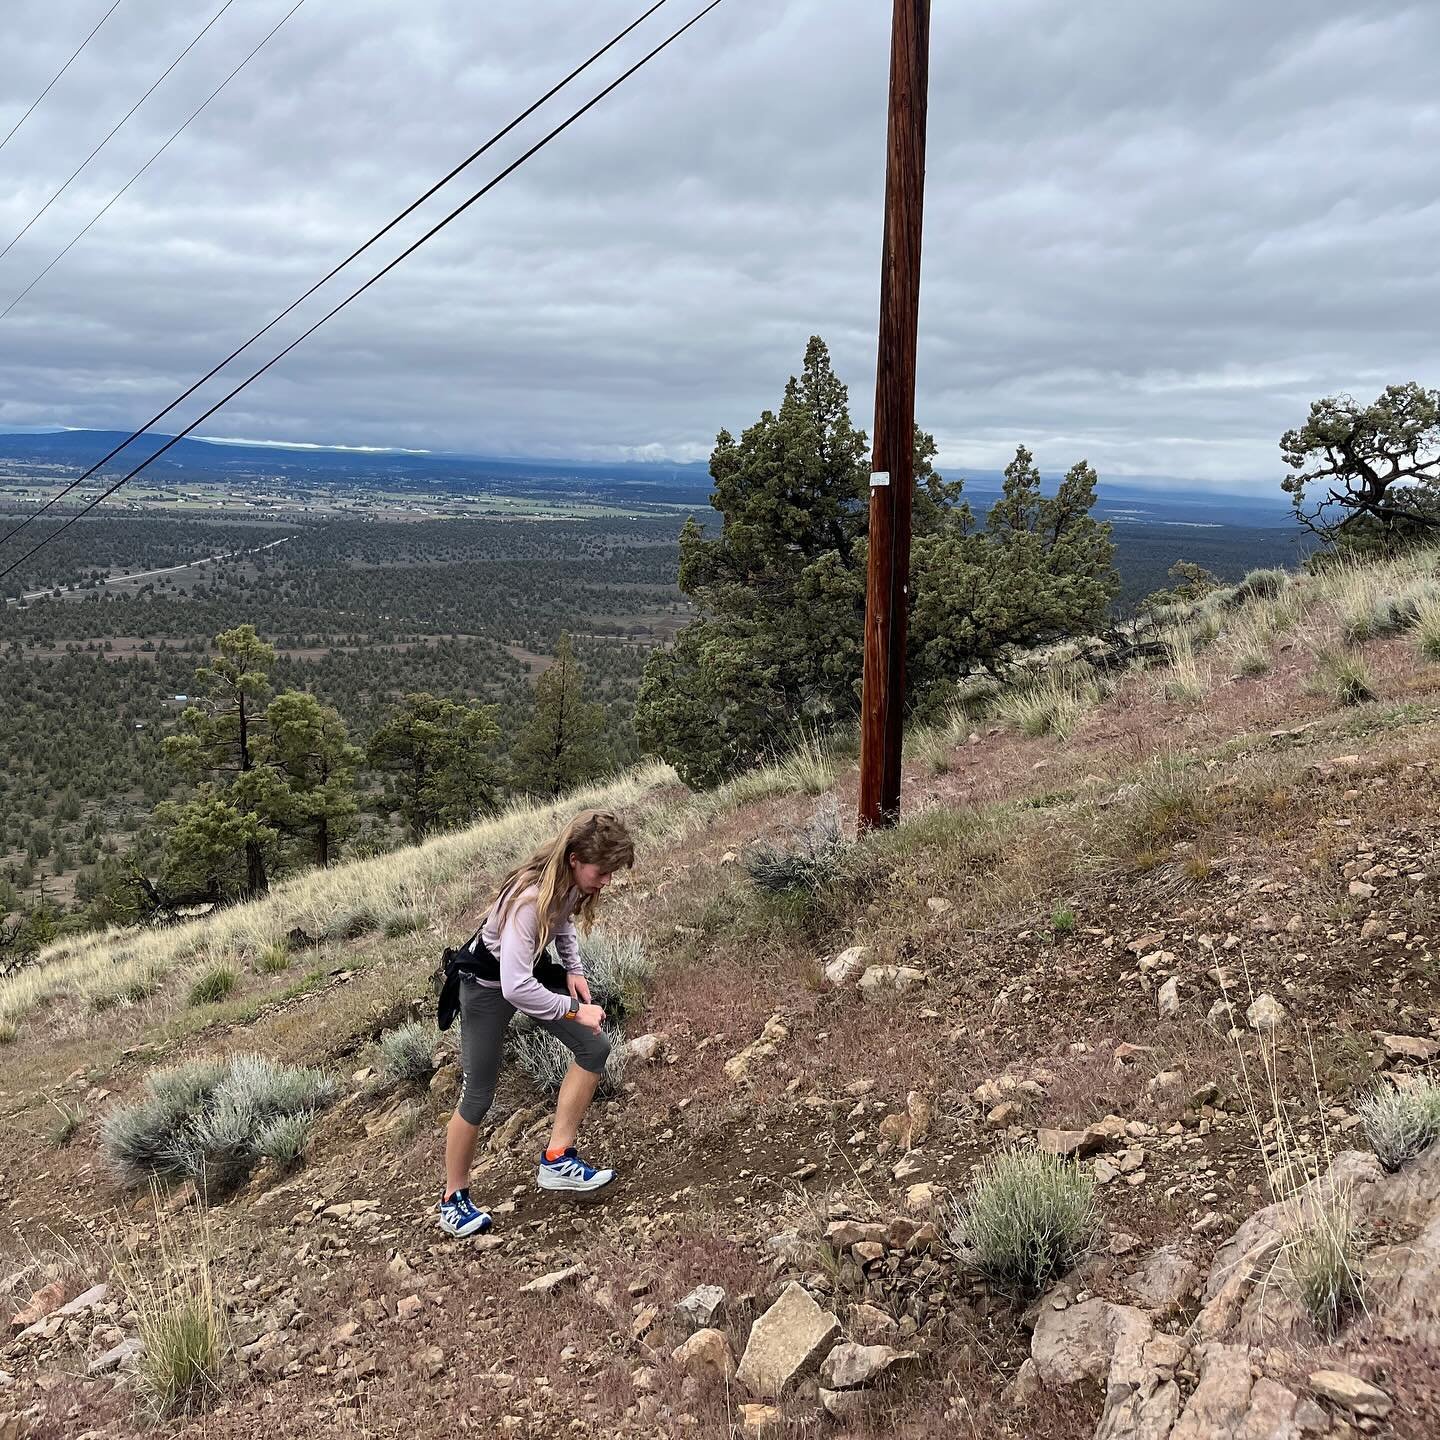 Mount Marathon training started today! Micah got in his first Powerlines climb at Cljne Butte. 
He&rsquo;ll be sore tomorrow.😬
Let the countdown to July 4th begin - 2 months!
May the 4th be with you! 
#maythe4thbewithyou @mountmarathonrace